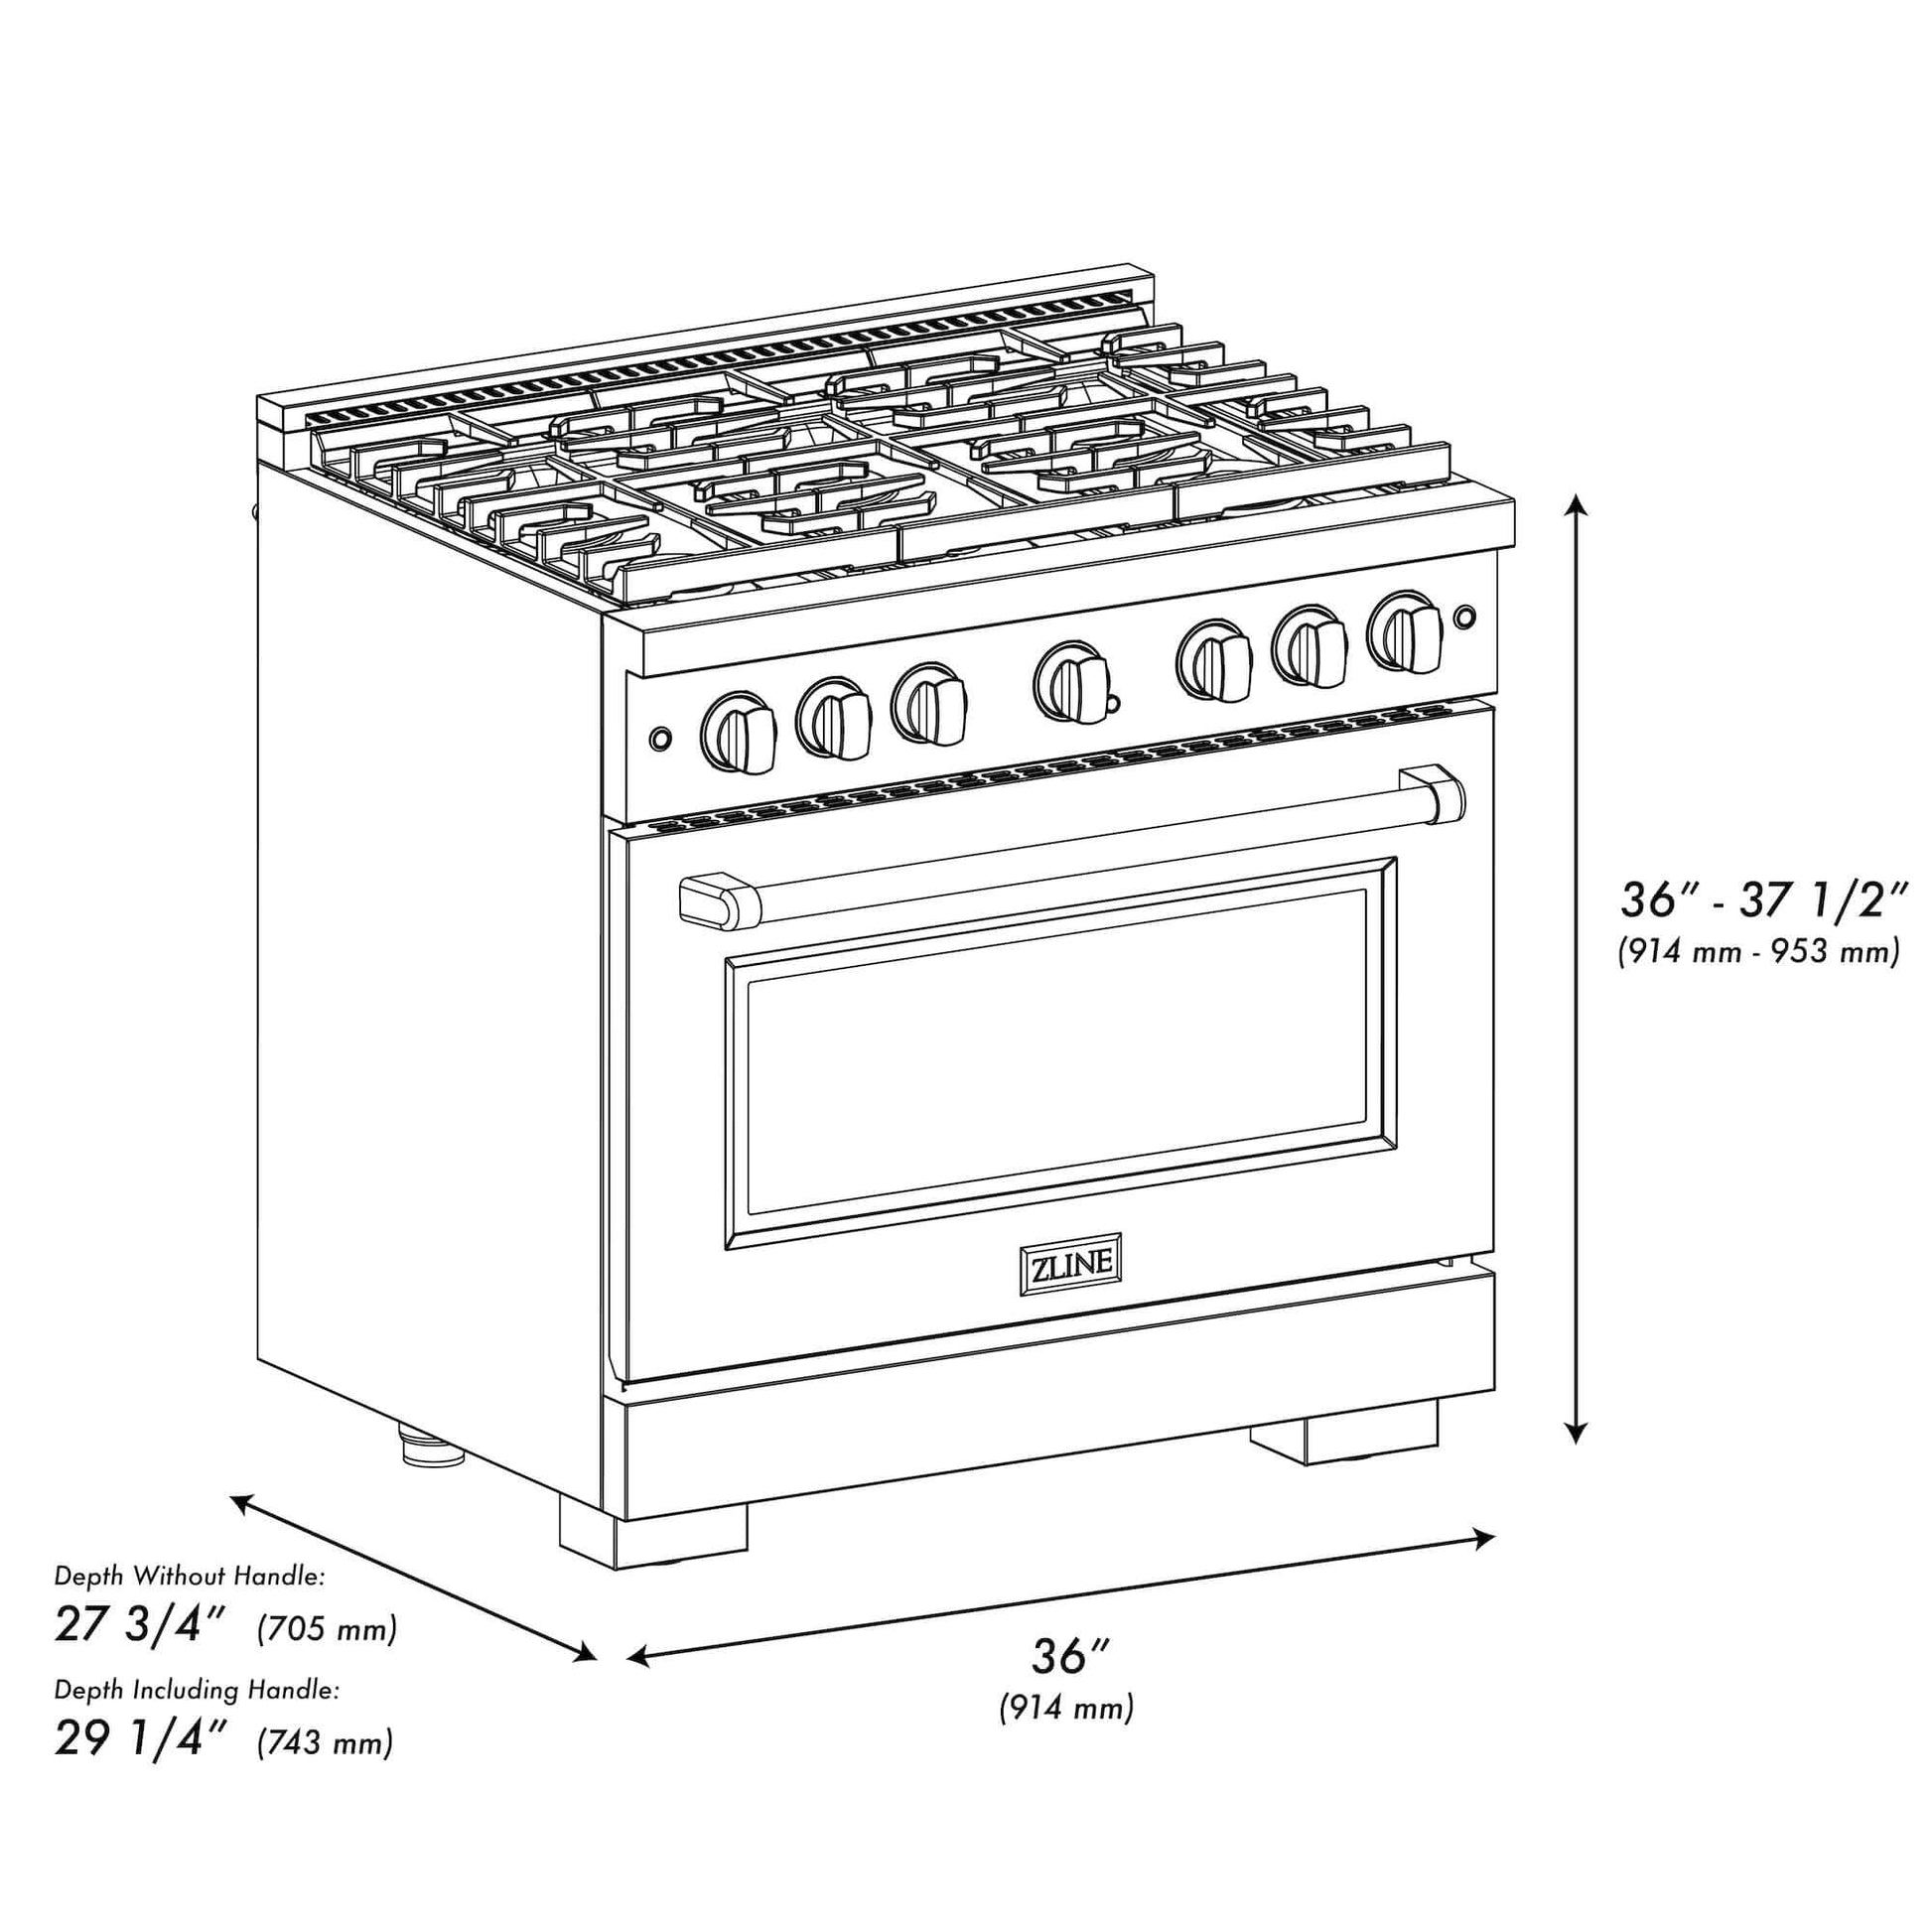 ZLINE 36 in. 5.2 cu. ft. 6 Burner Gas Range with Convection Gas Oven in Stainless Steel (SGR36) dimensional diagram with measurements.